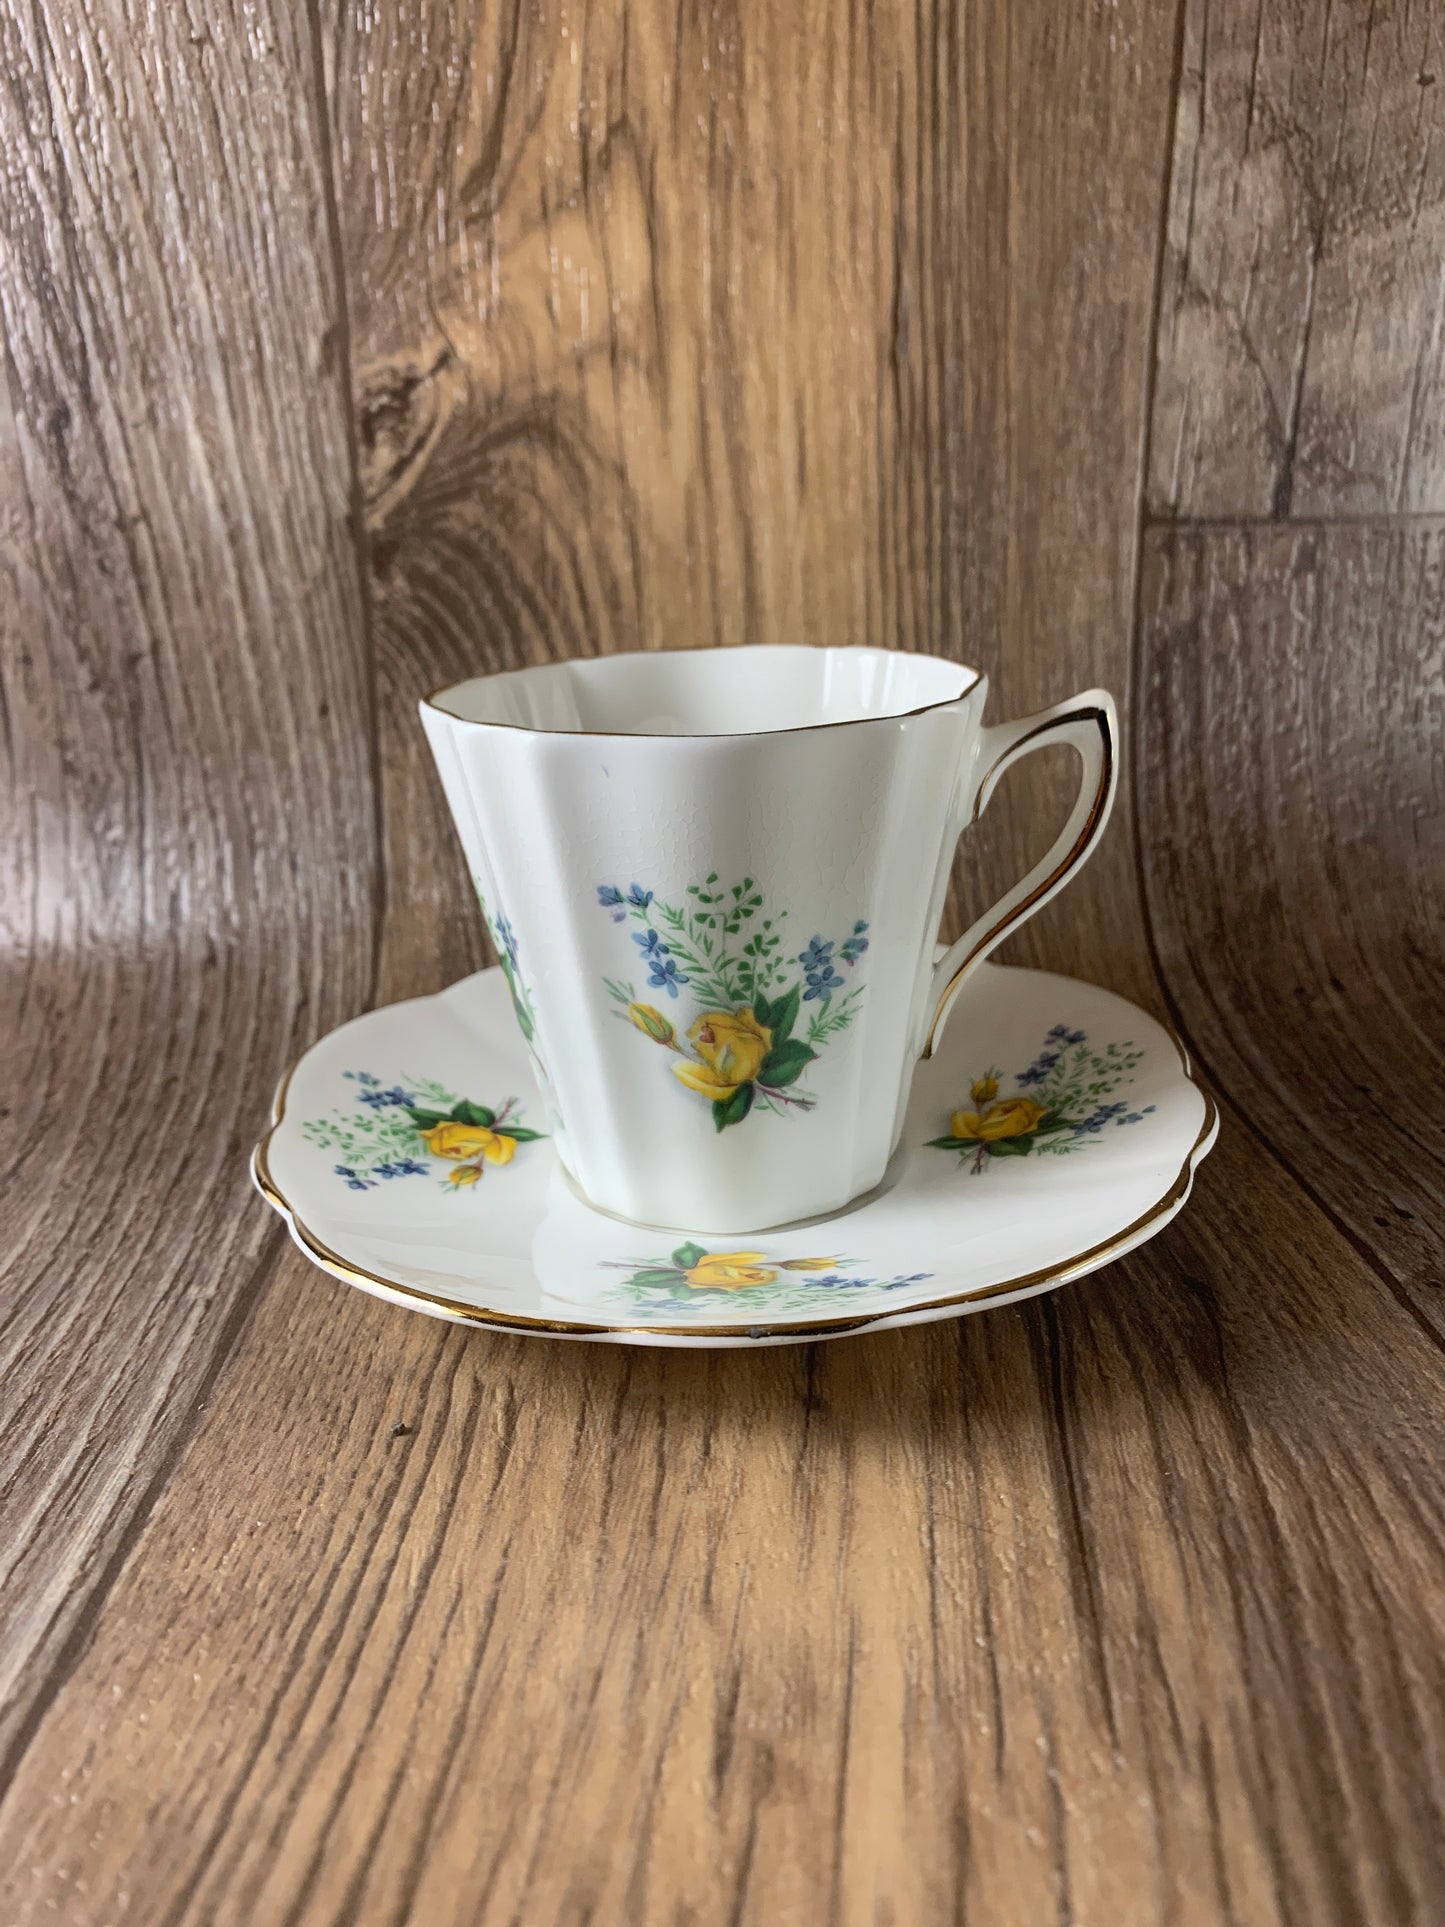 Yellow and Blue Floral Teacup and Saucer